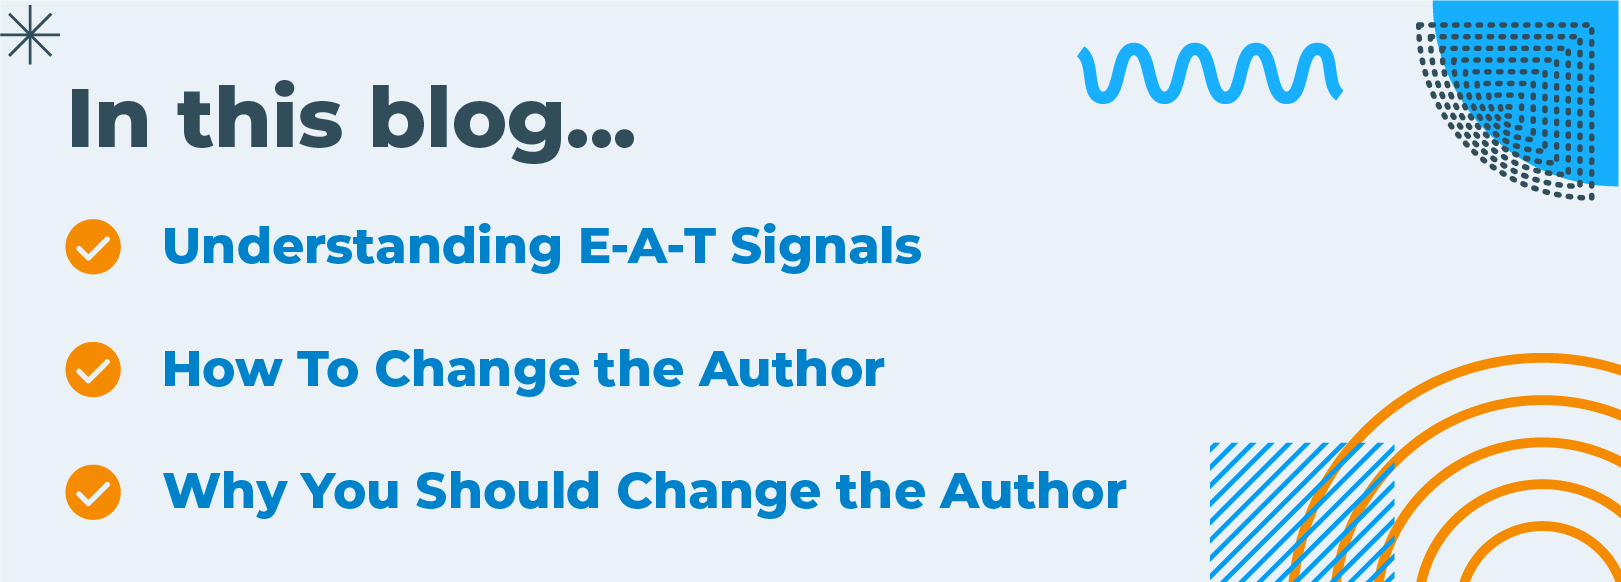 How to Change the Author in WordPress for Maximum E-A-T Signals